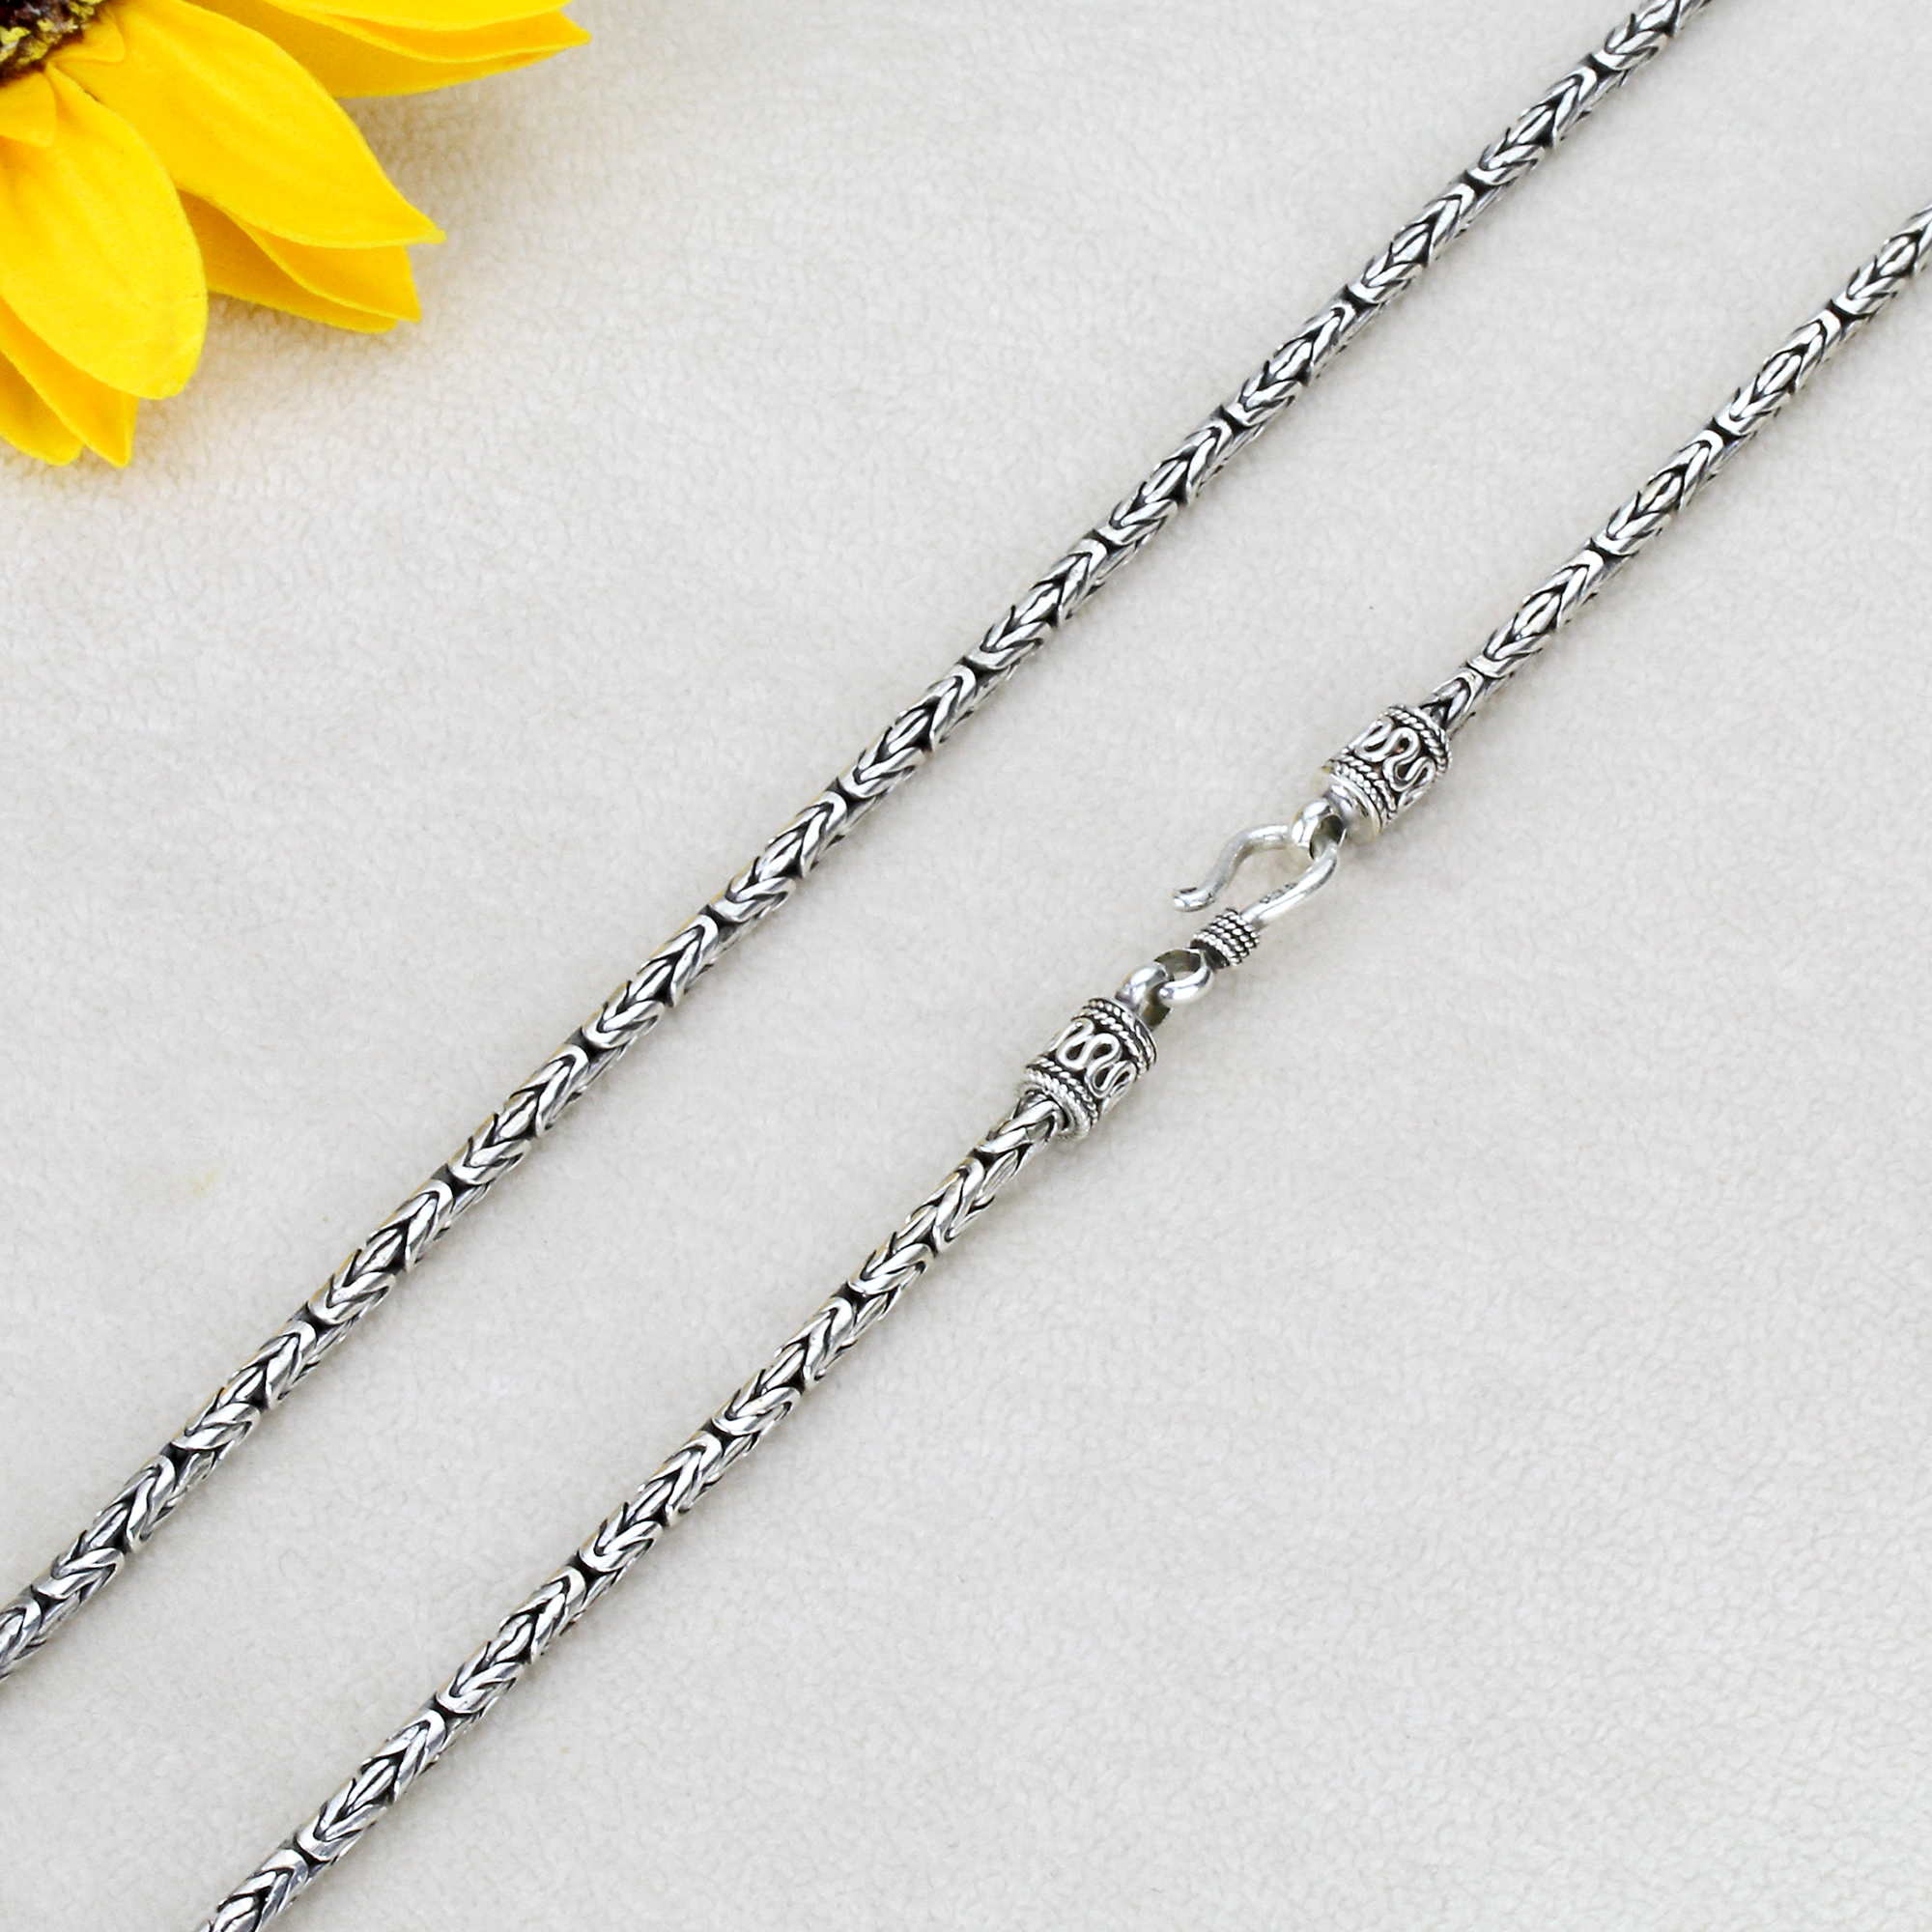 Mens 2.5mm 925 Sterling Silver Bali Byzantine Chain Necklace